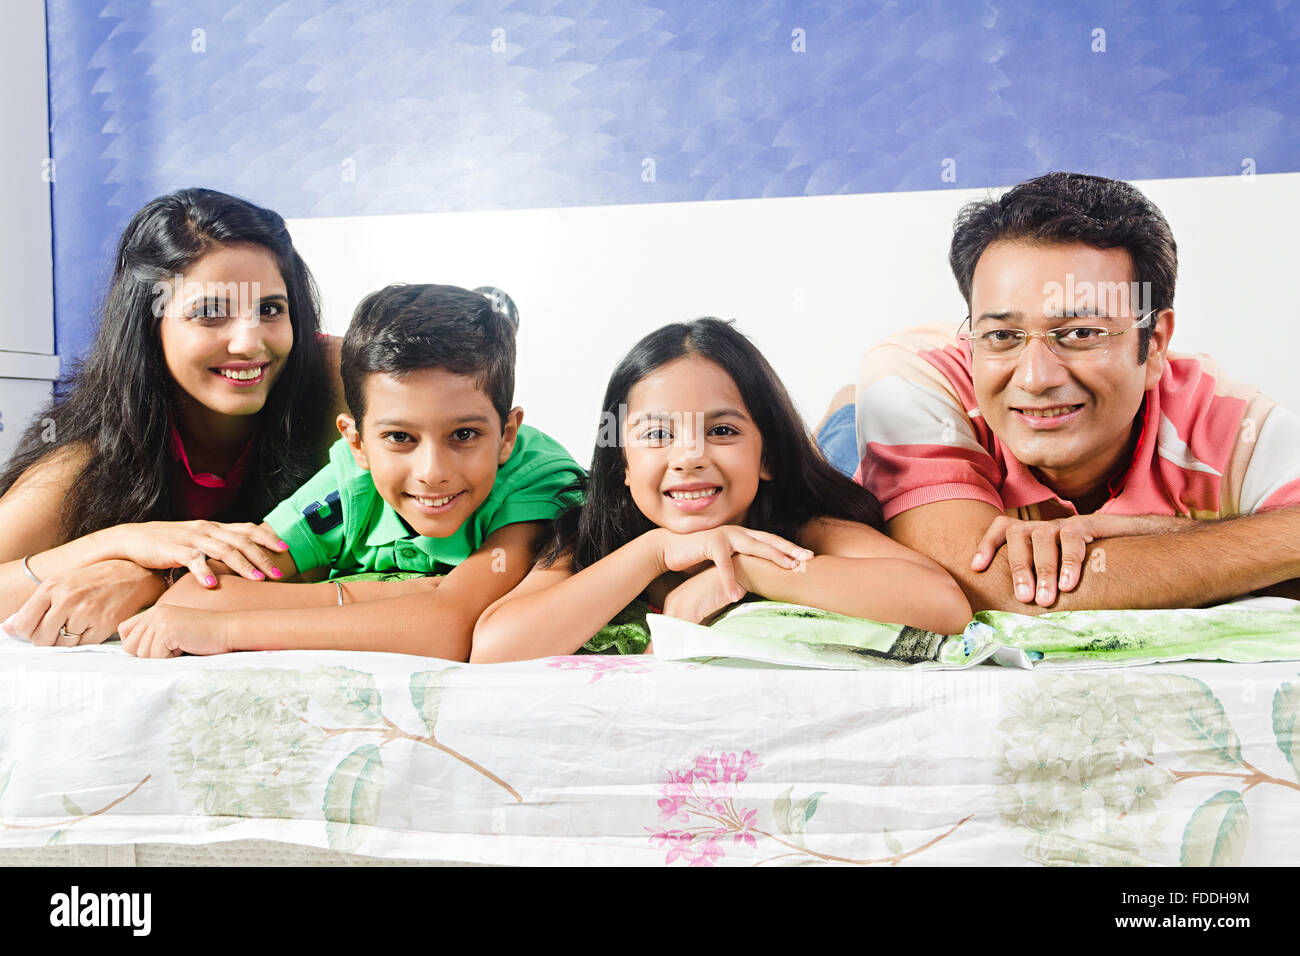 4 People Parents and Kid Bedroom Lying Down Relaxation Stock Photo